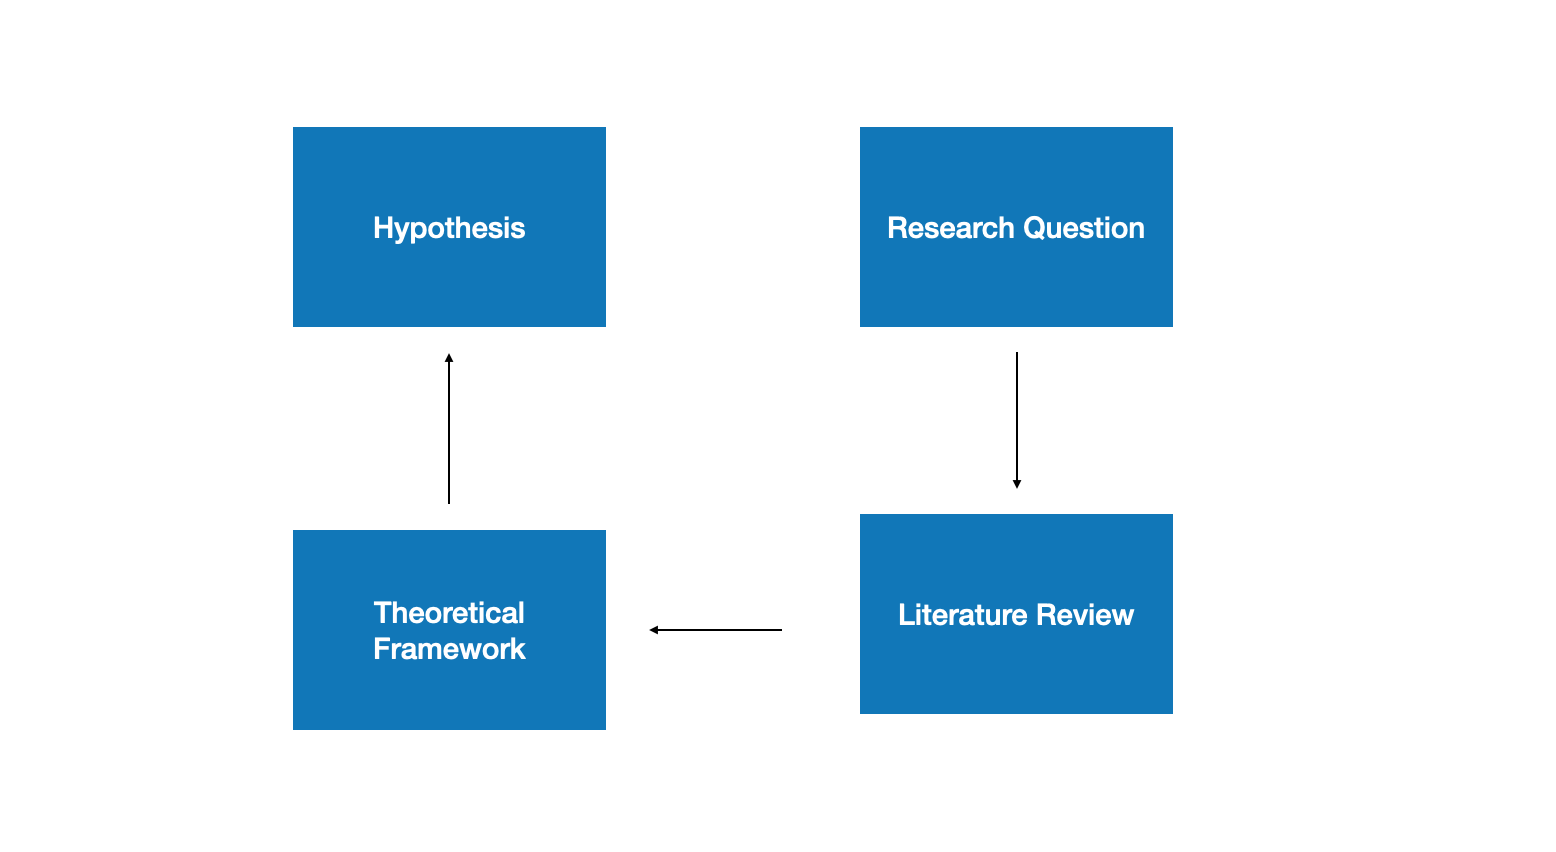 review of literature on hypothesis